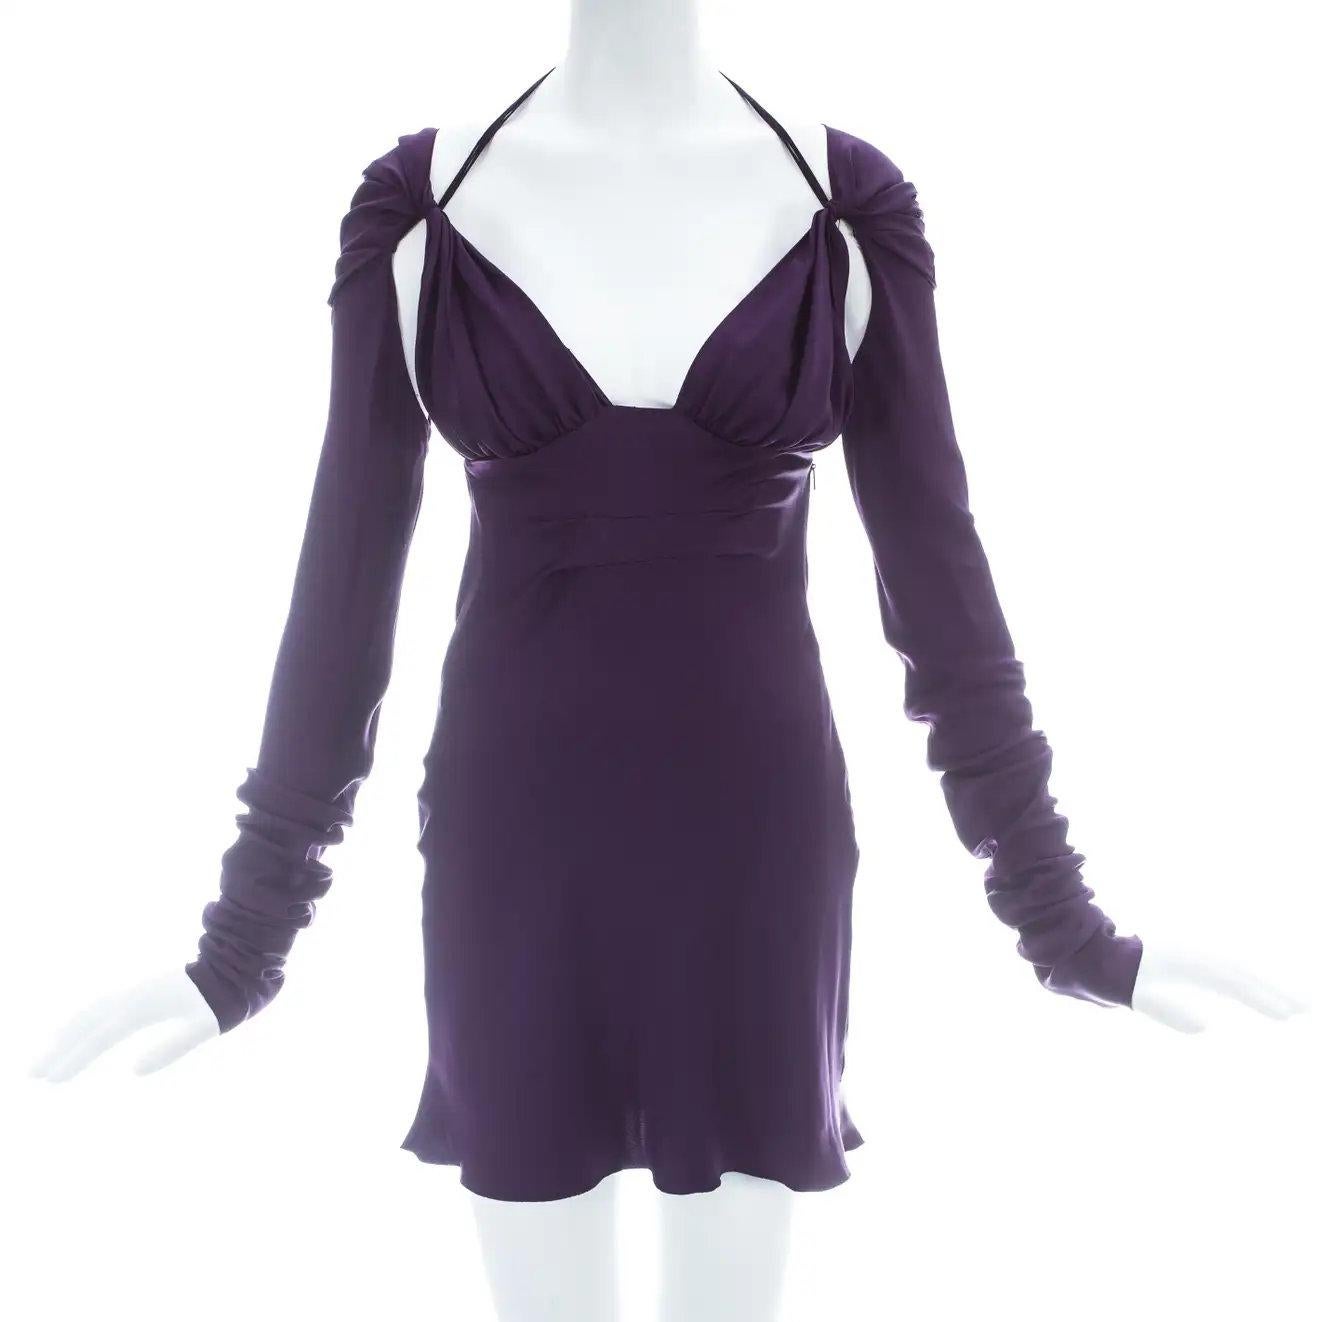 Gucci by Tom Ford Amethyst Silk Mini Dress, c. 2003
Marked Size: IT 38 , US - 2/4
Made in Italy
Excellent condition